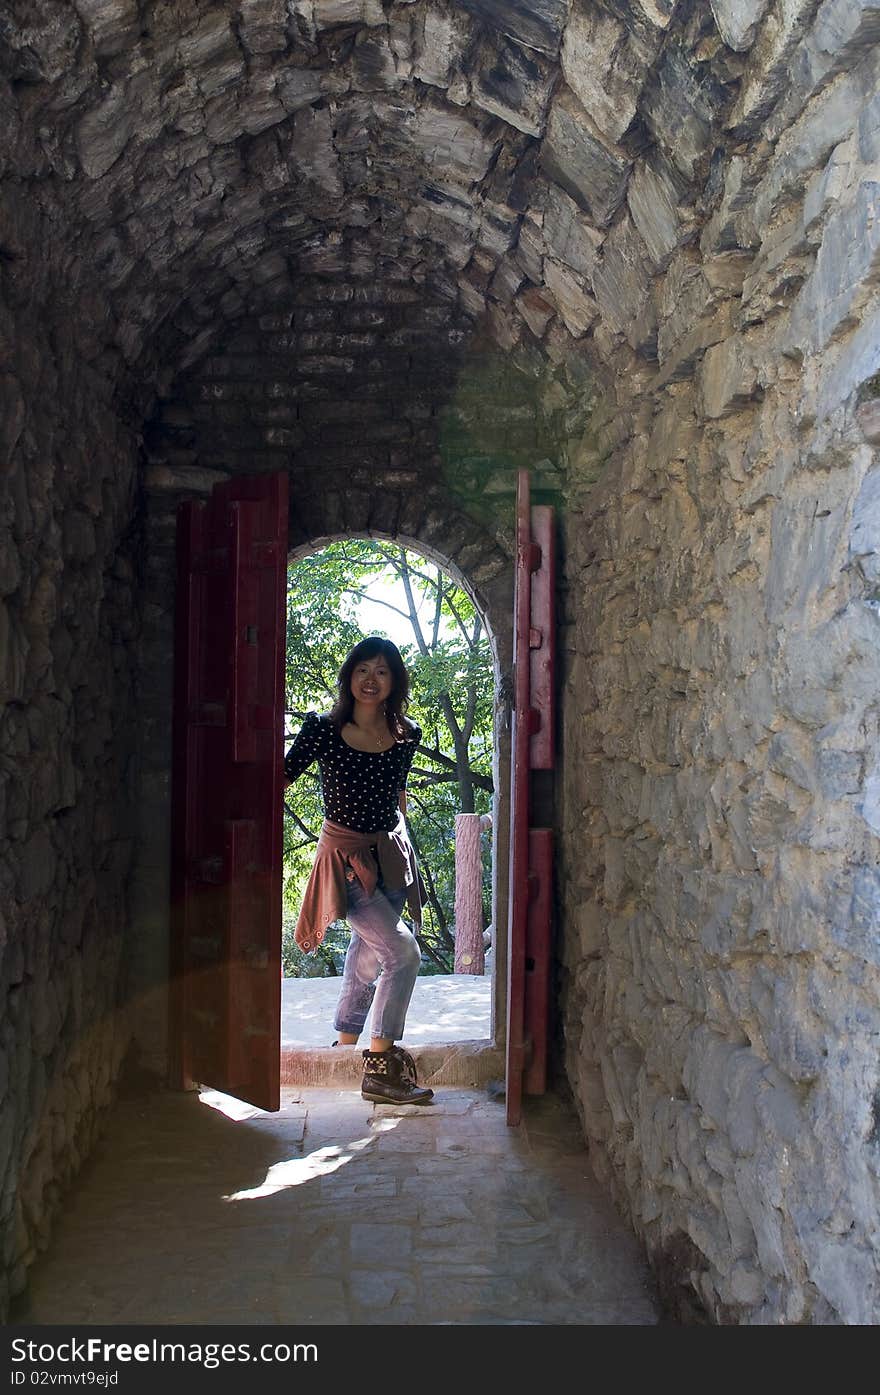 The silhouette of a woman find a grotto door. The silhouette of a woman find a grotto door